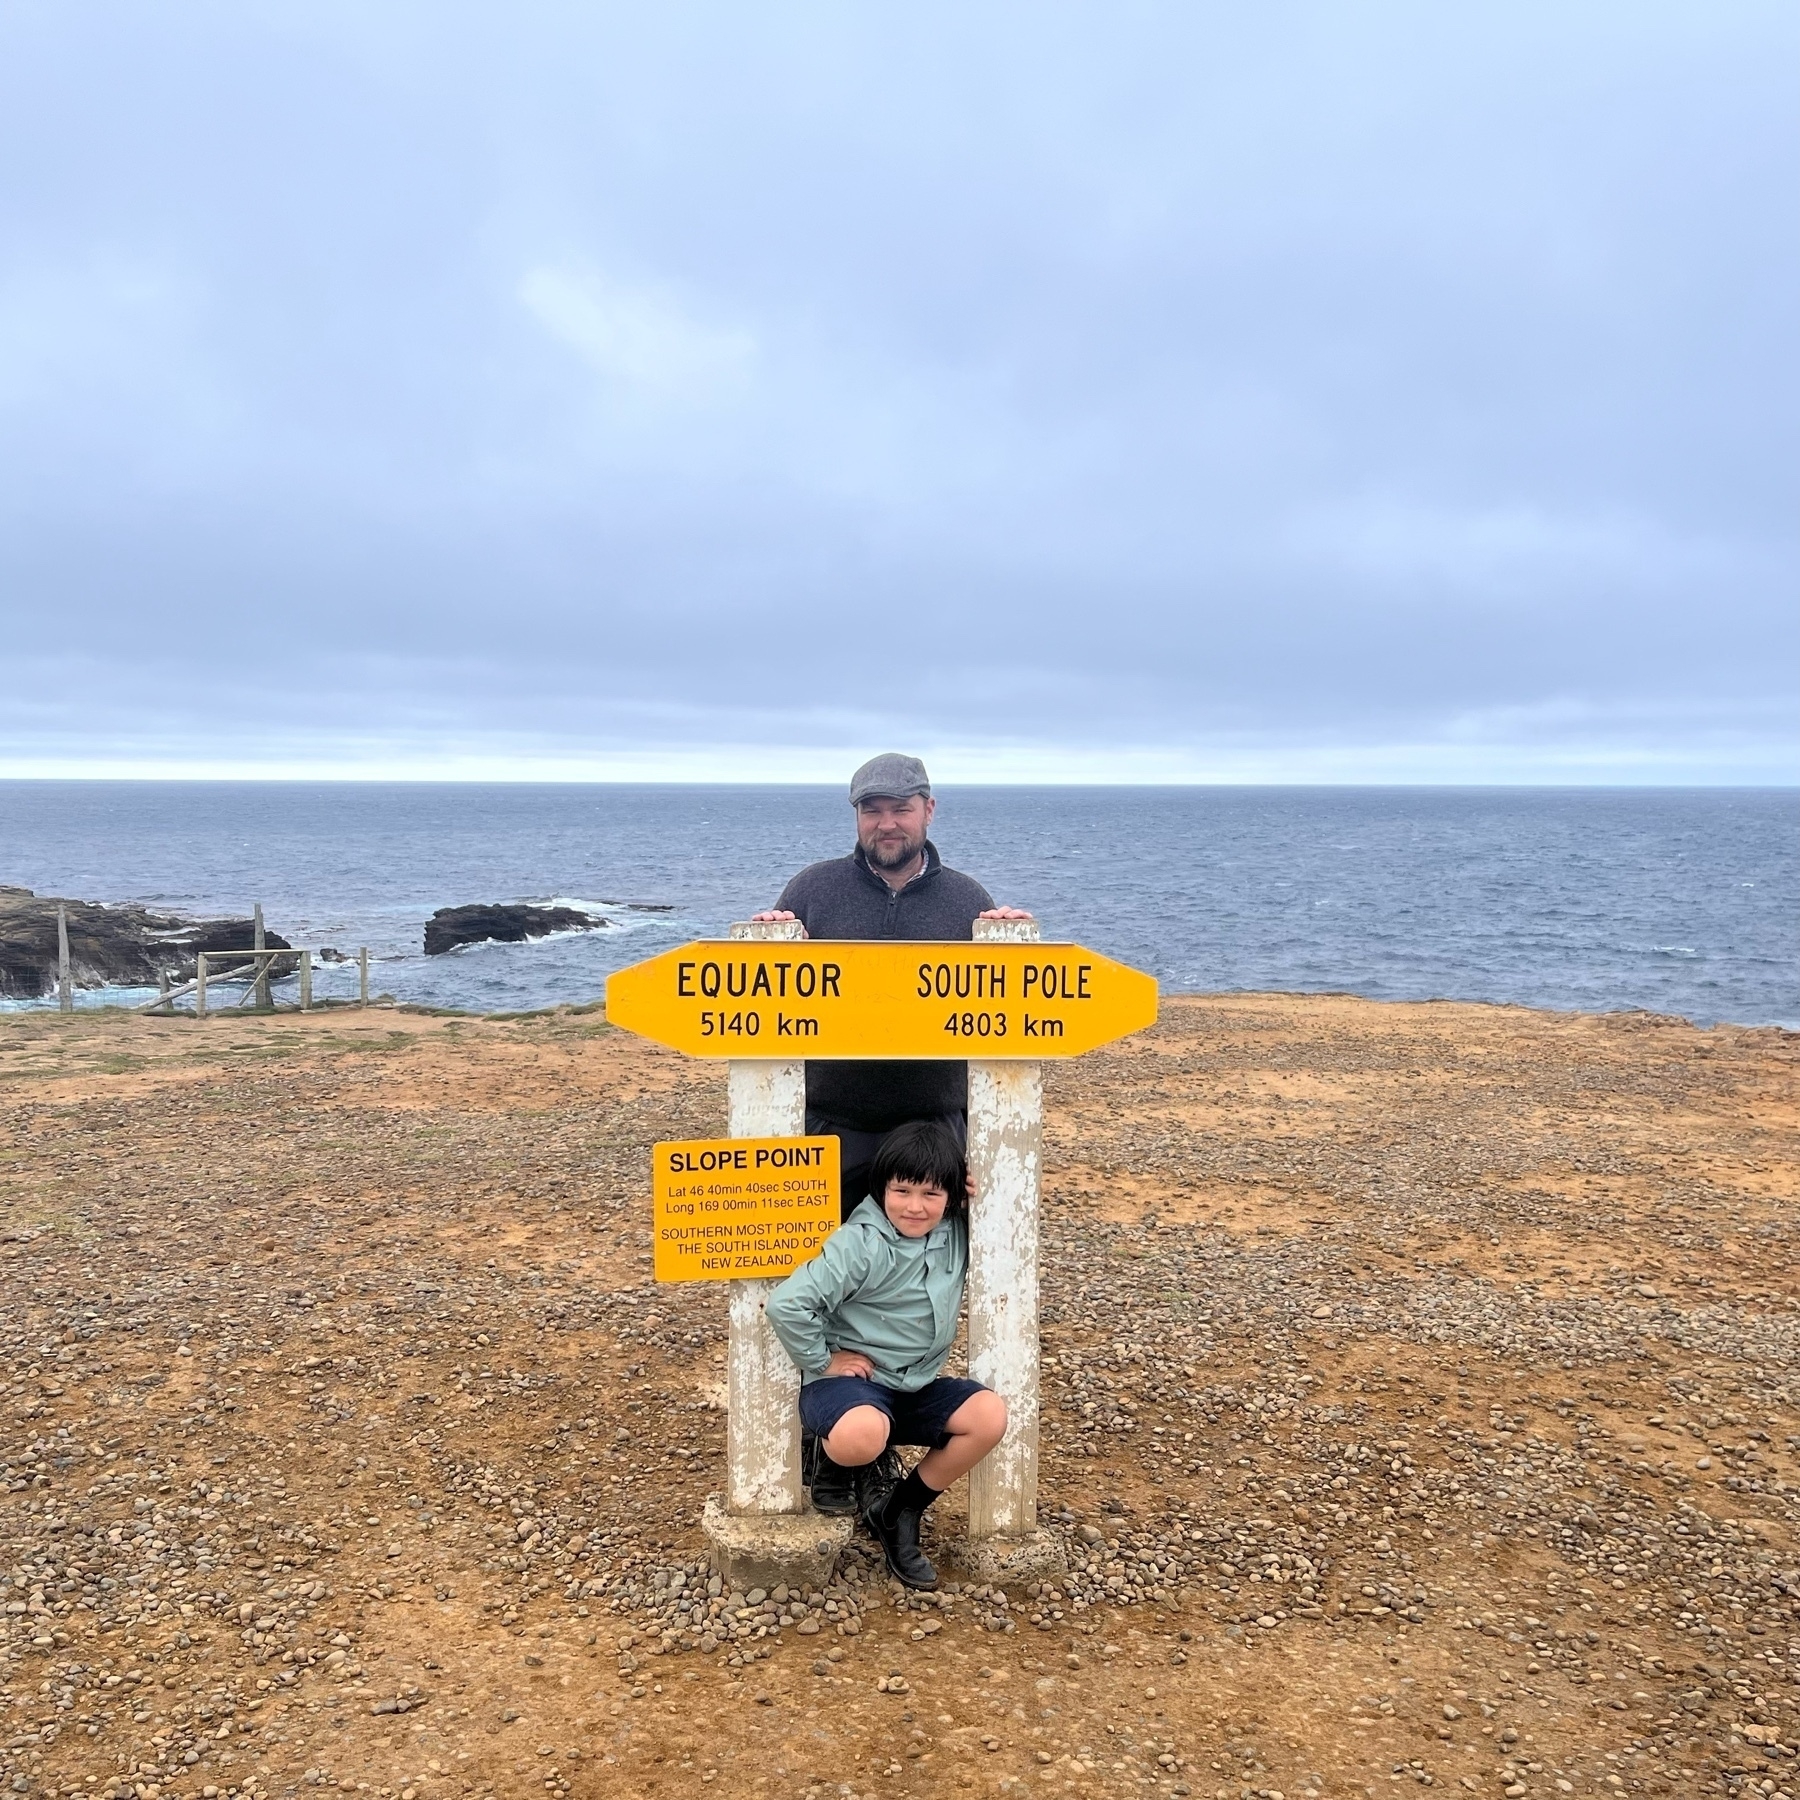 Anthony and Victor standing by the Slope Point sign which reads: EQUATOR
5140 km, SOUTH POLE
4803 km, SLOPE POINT
Lat 46 40min 40sec SOUTH,
Long 169 00min 11sec EAST, SOUTHERN MOST POINT OF THE SOUTH ISLAND OF
NEW ZEALAND.